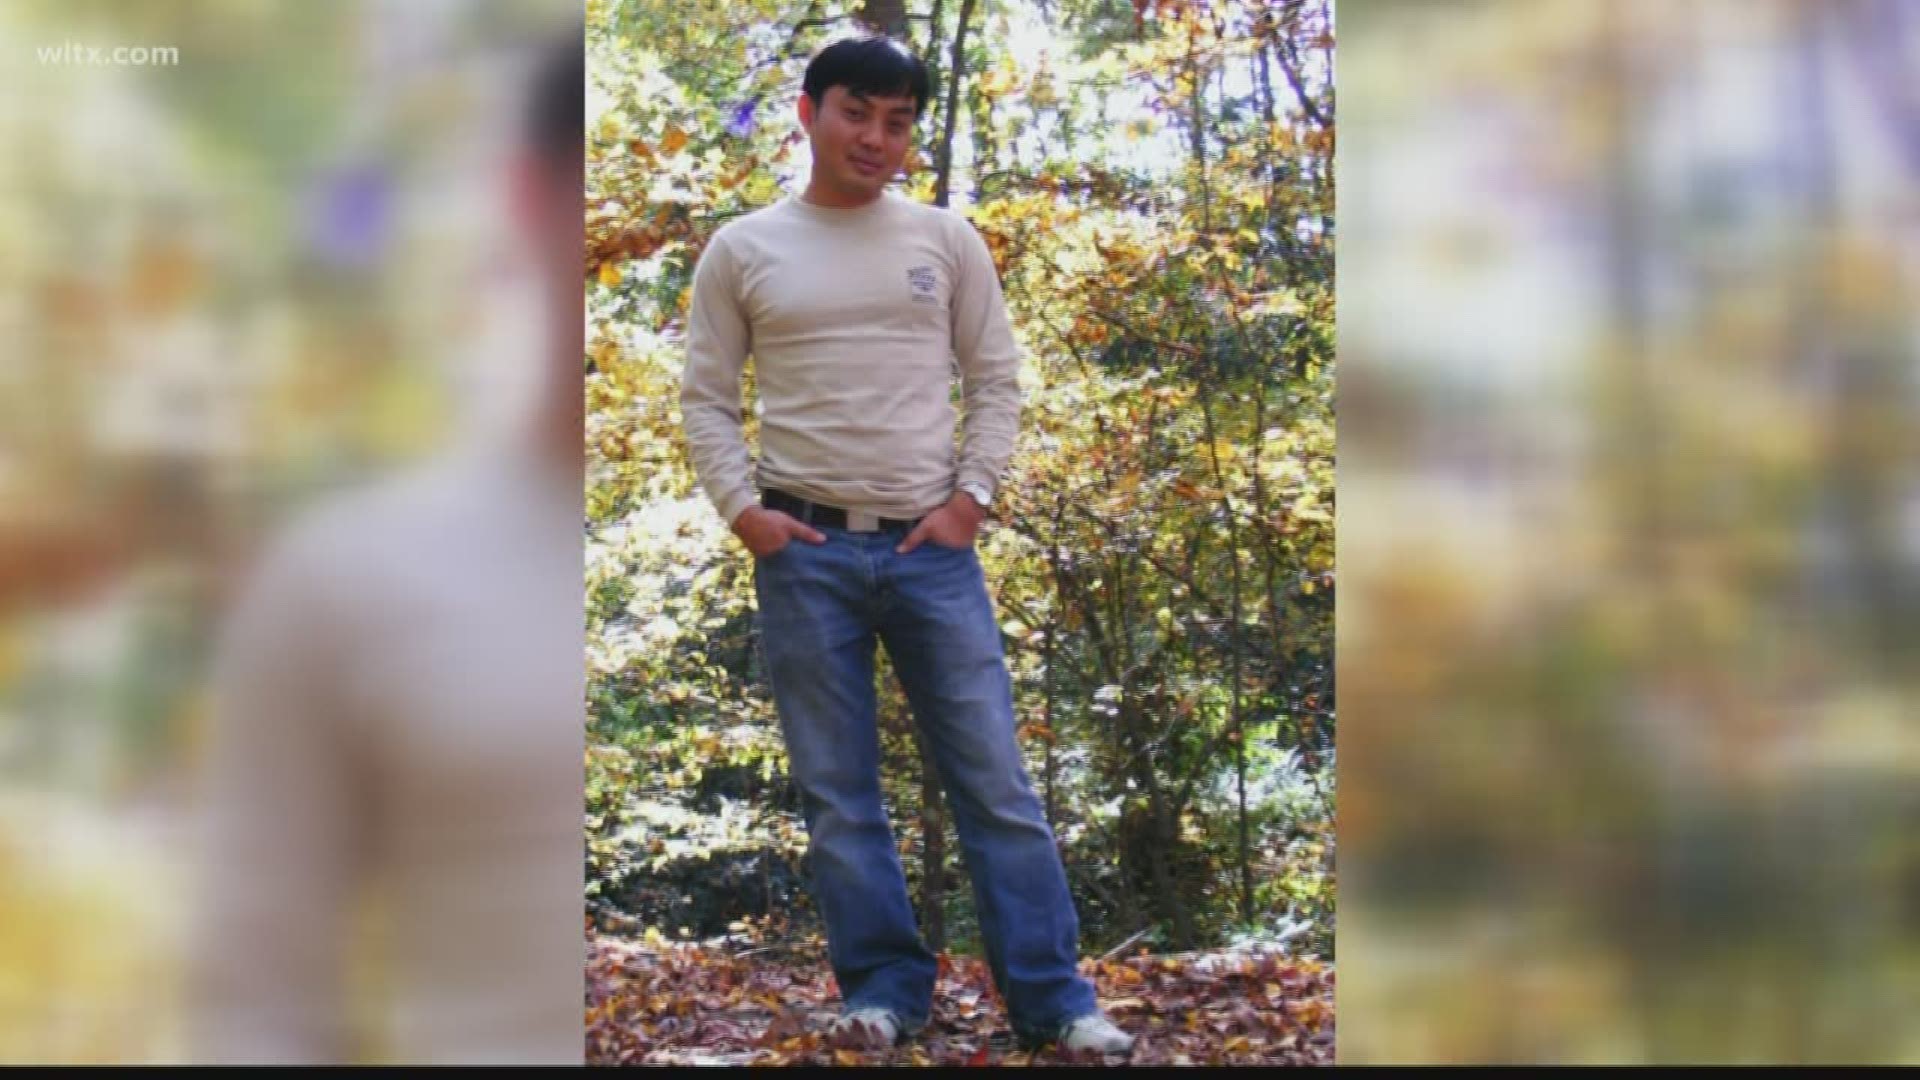 The mother of 42-year-old Tao Gao is working to keep his memory alive.
Gao died last year after investigators say he drowned in a pond in Irmo.